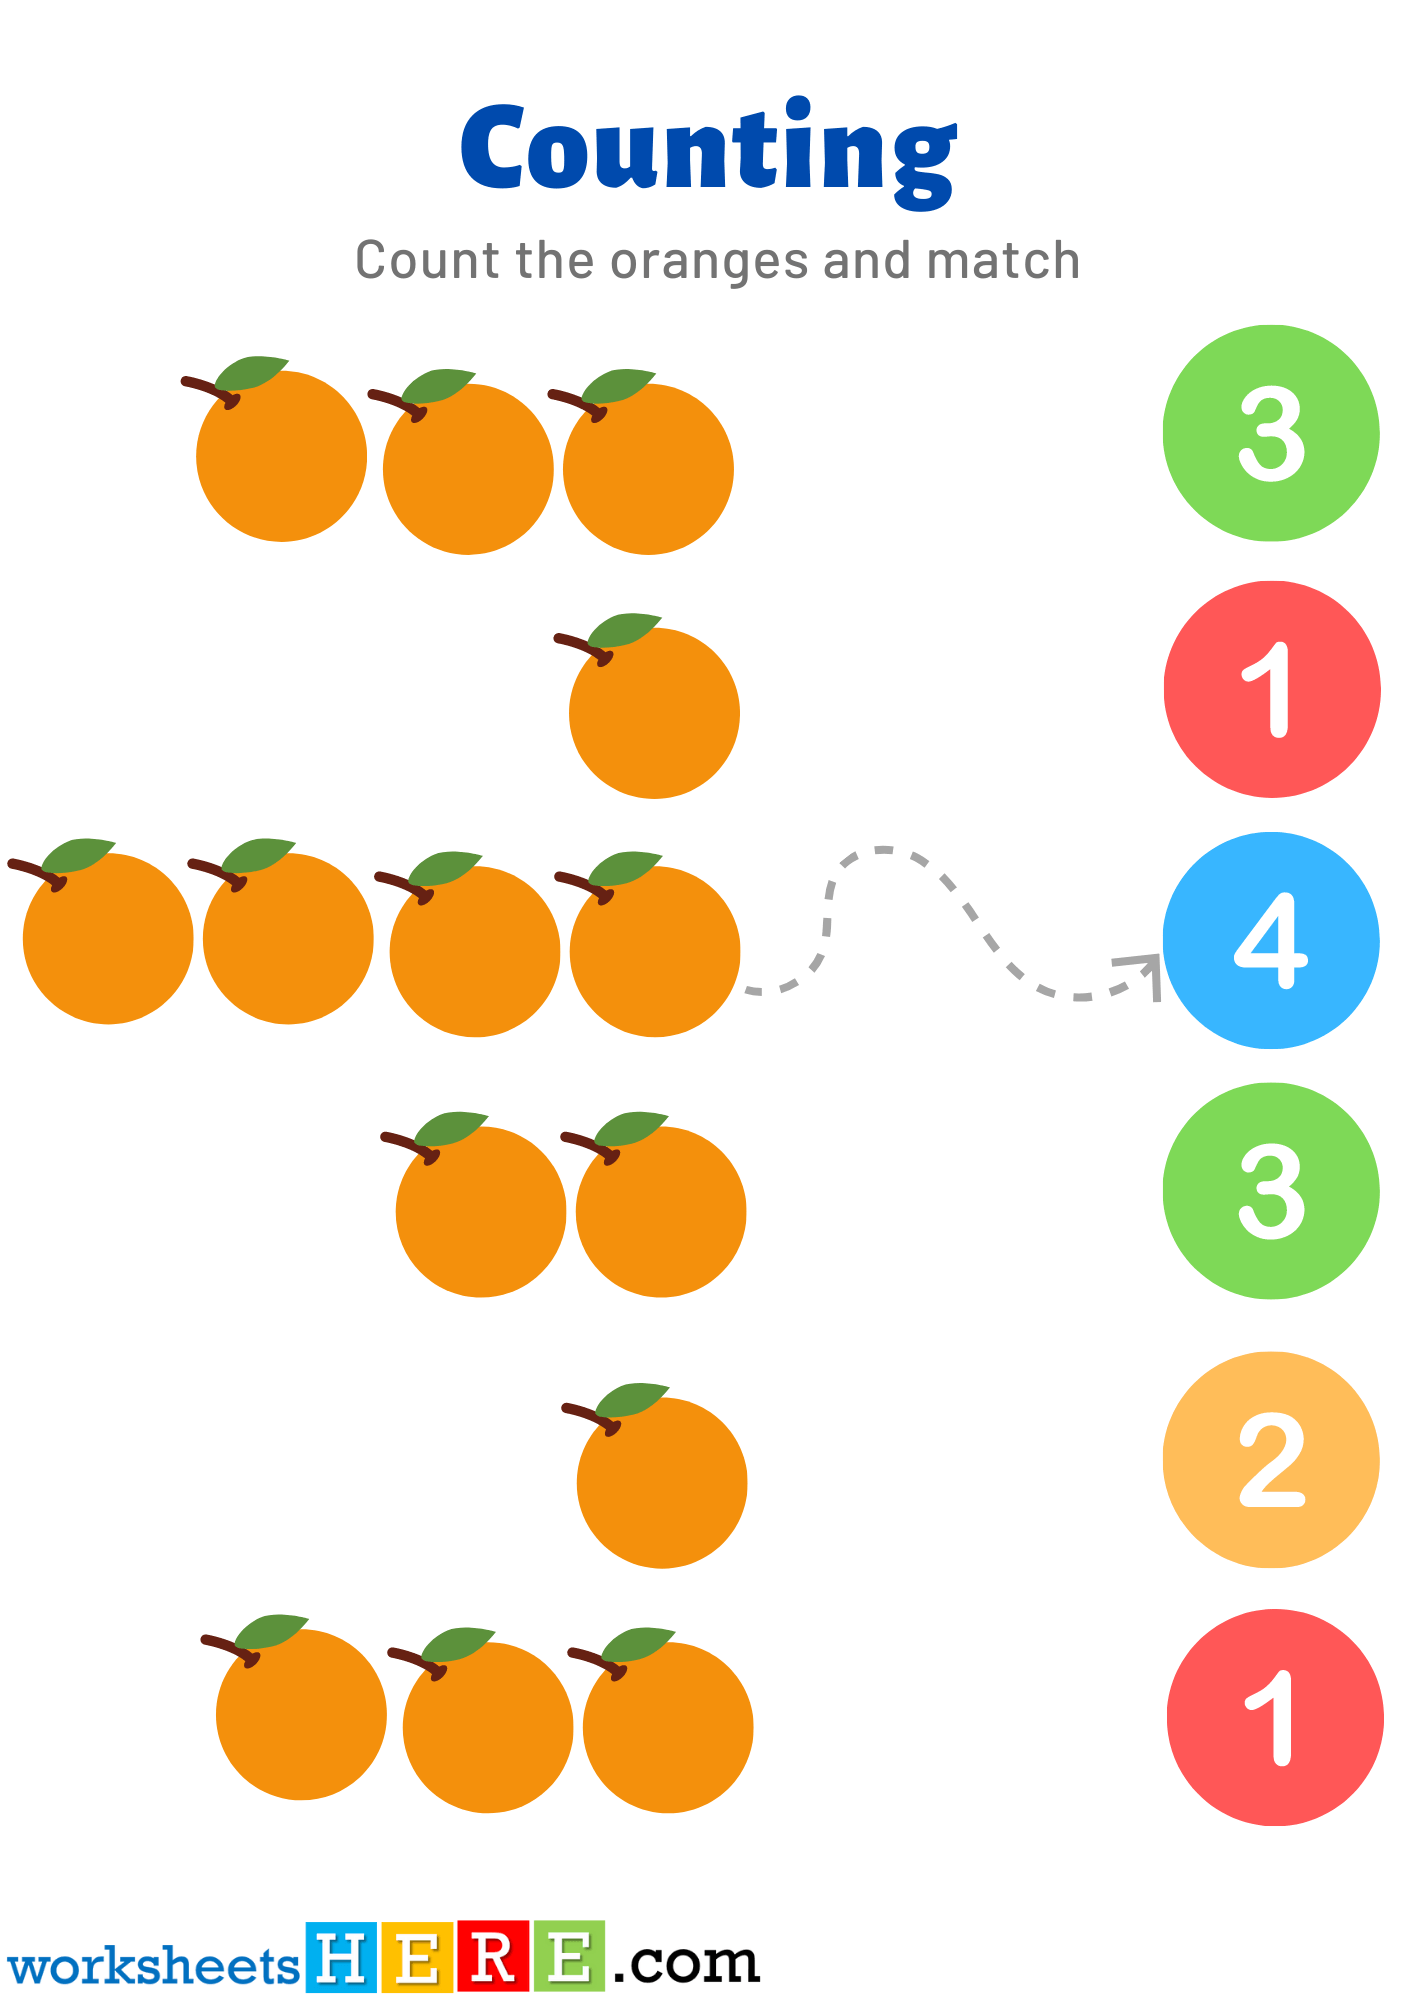 Count Oranges and Match, Counting Pdf Worksheets for Kindergarten